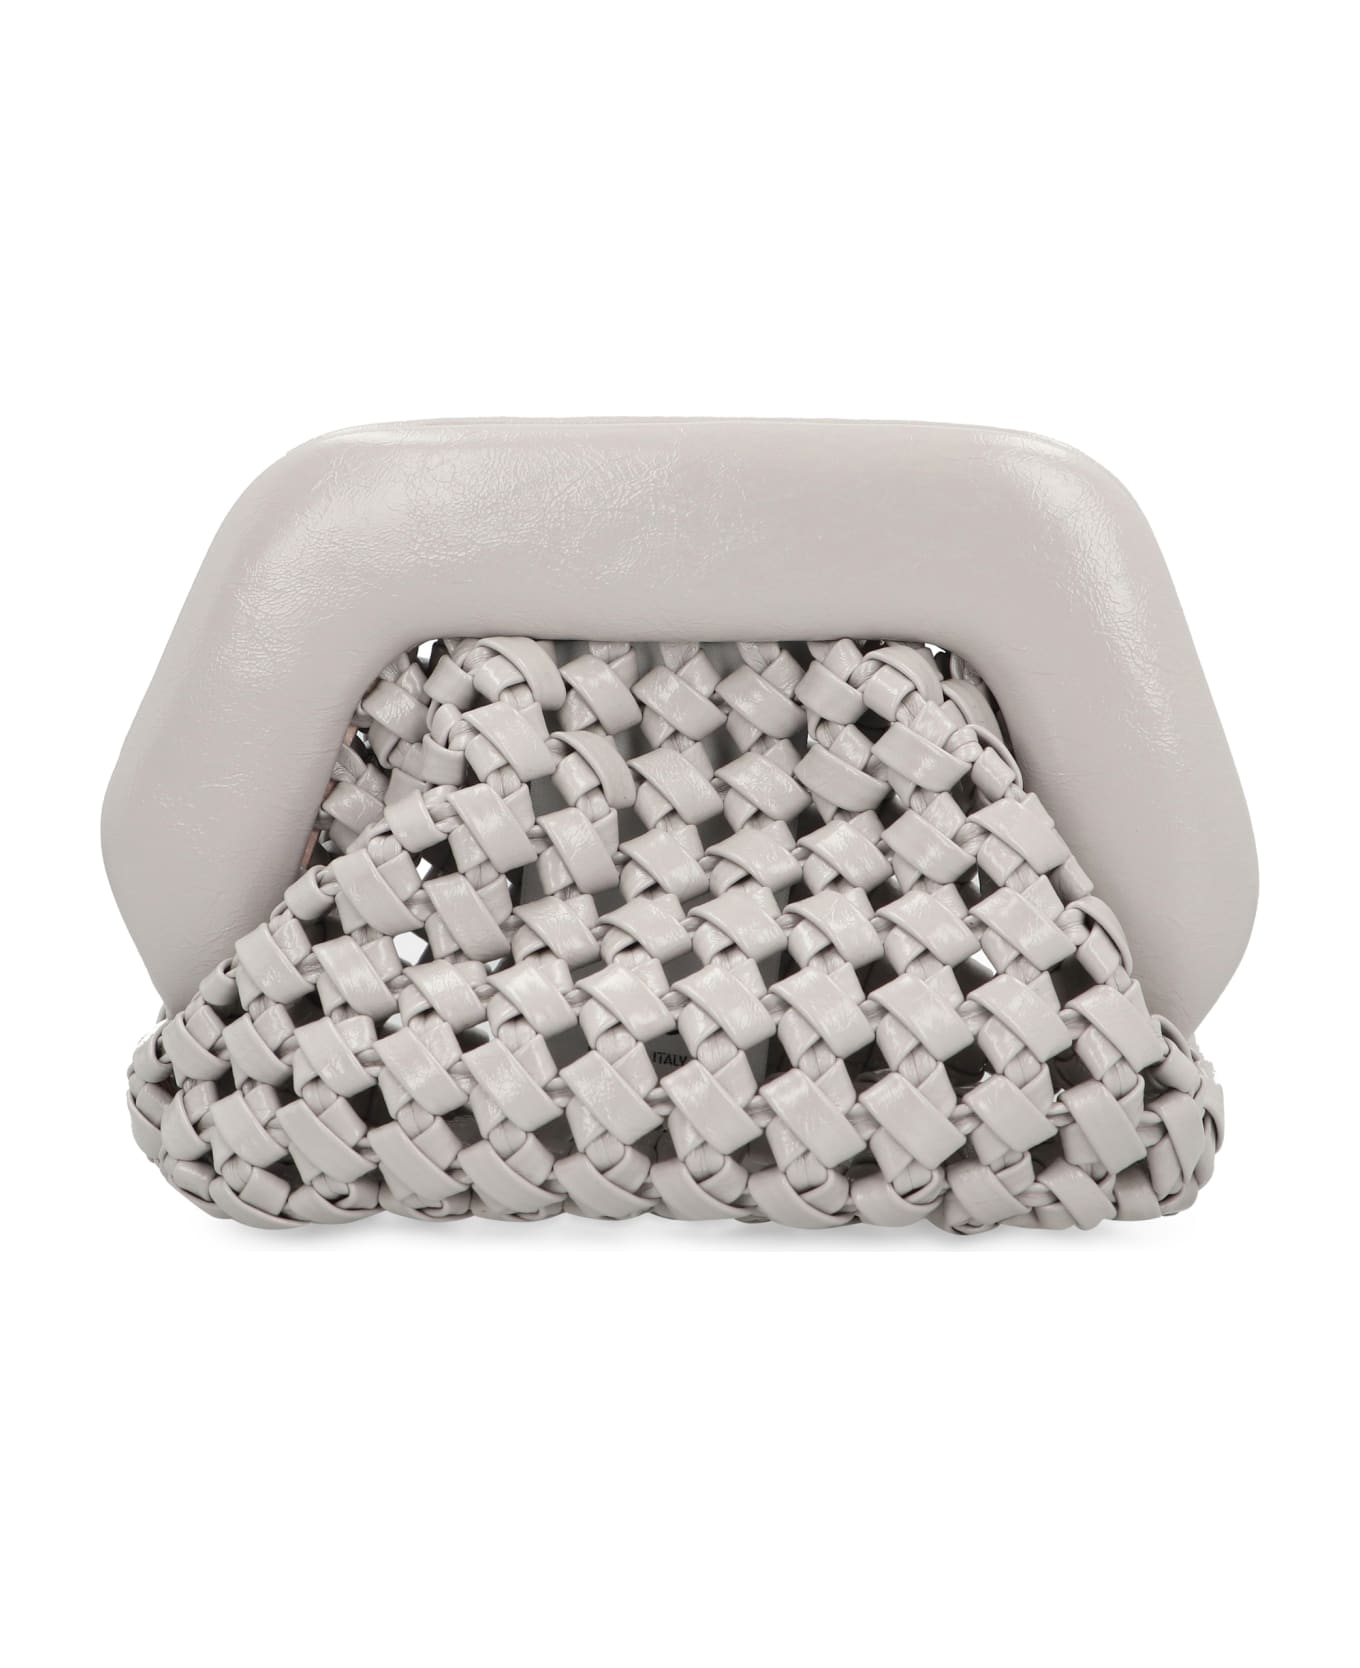 THEMOIRè Gea Knots Shiny Faux Leather Clutch - grey クラッチバッグ